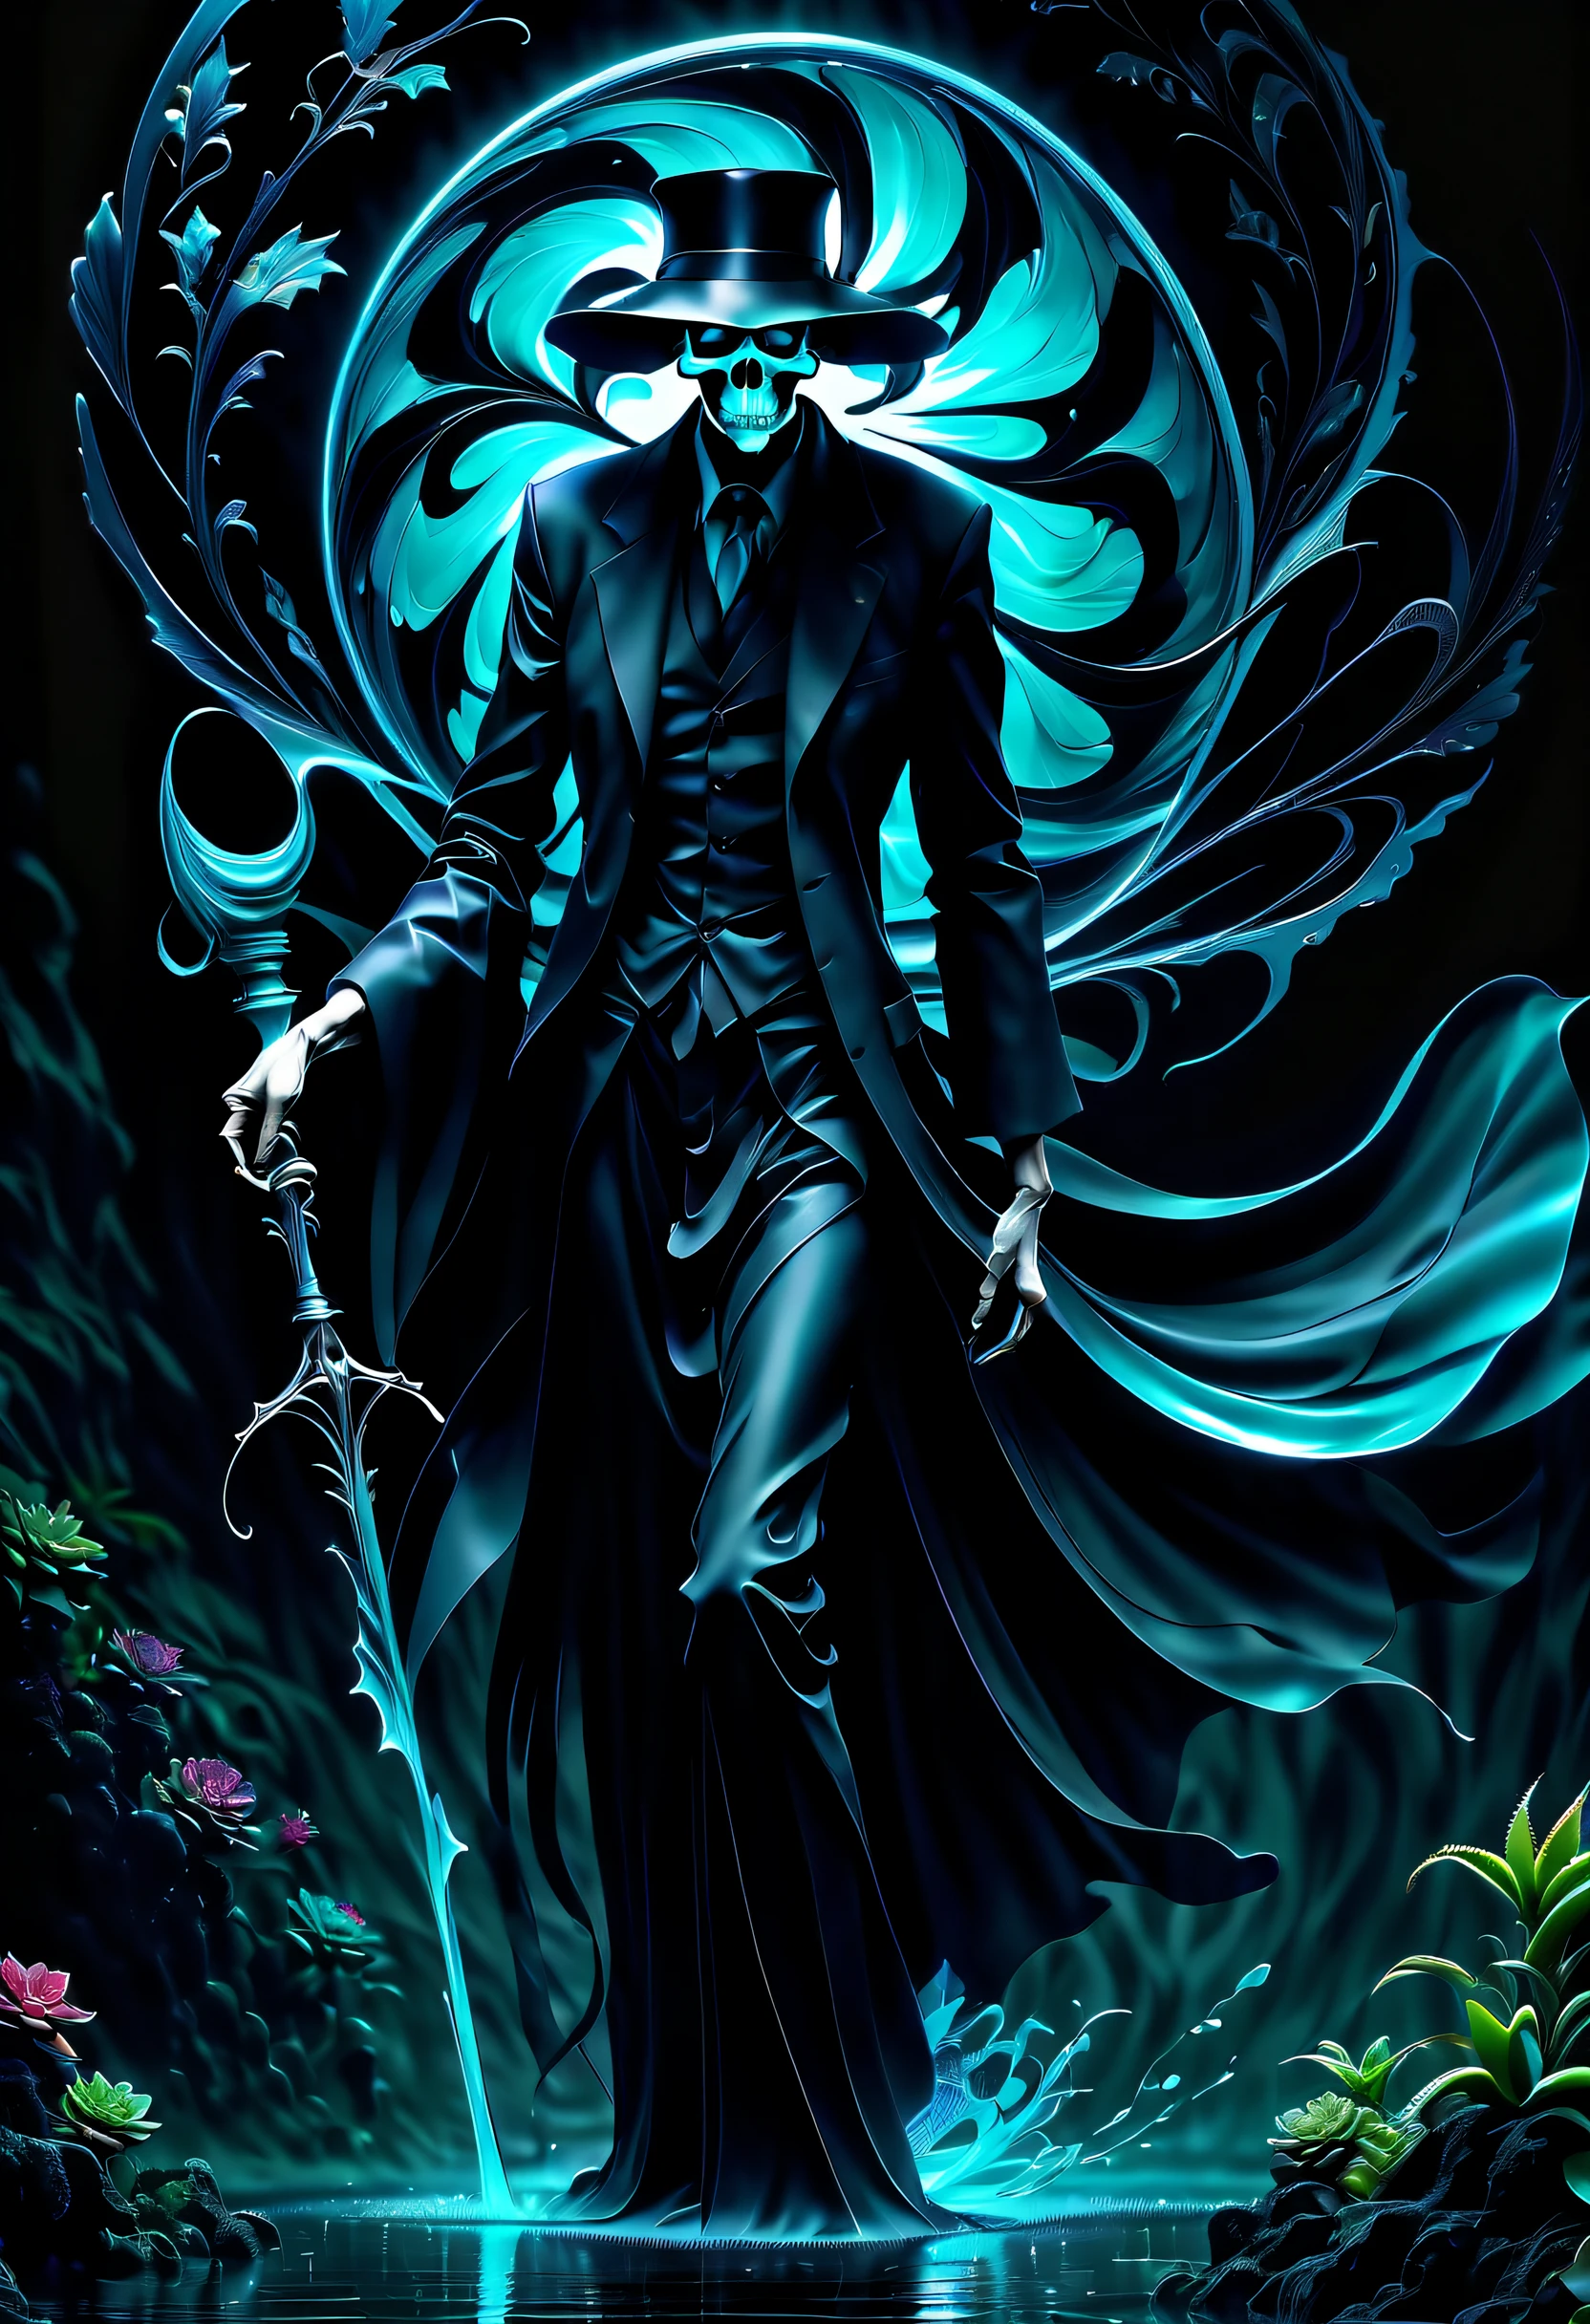 (((dark cyan black_Light painting with dazzling detail and texture art:1.3))), (((beautiful gothic horror、It&#39;s a Grim Reaper that has been holding for a long time.。_large Scythe:1.3))), (((1 piece of swallowtail butterfly with plenty of glittering scale powder:1.2))), (((To a juicy planet:1.3))), (((Seamless insane fusion design:1.4))), great atmosphere pose, (((Black_Light style with great rendering:1.4))), (((Illustration of different styles of top and bottom art:1.3))), (((Under the dark_Color_Water tornado due to upper radiation and release:1.6))), All capture beautiful details Black_light glow, (((beautiful detail black_light_Shine and dim glow behind:1.3))), Mysterious beauty, elegant twist, Swirls and sparkling glass, Dim lighting, (((high contrast resolution:1.1))), (((Delicate touch:1.5))), (((pop splash succulent neon_Hazy glow_garden background details:1.1))), (((Intricate details:1.3))), (((fantasy fairy illustration:1.2))), matte paint, mezzotint, detailed gouache painting, heavy stroke mix, ((Eternity and dark fantasy wishes:1.1)), (((Exquisitely clear details:1.4))), (((true masterpiece:1.4))), UHD drawing,